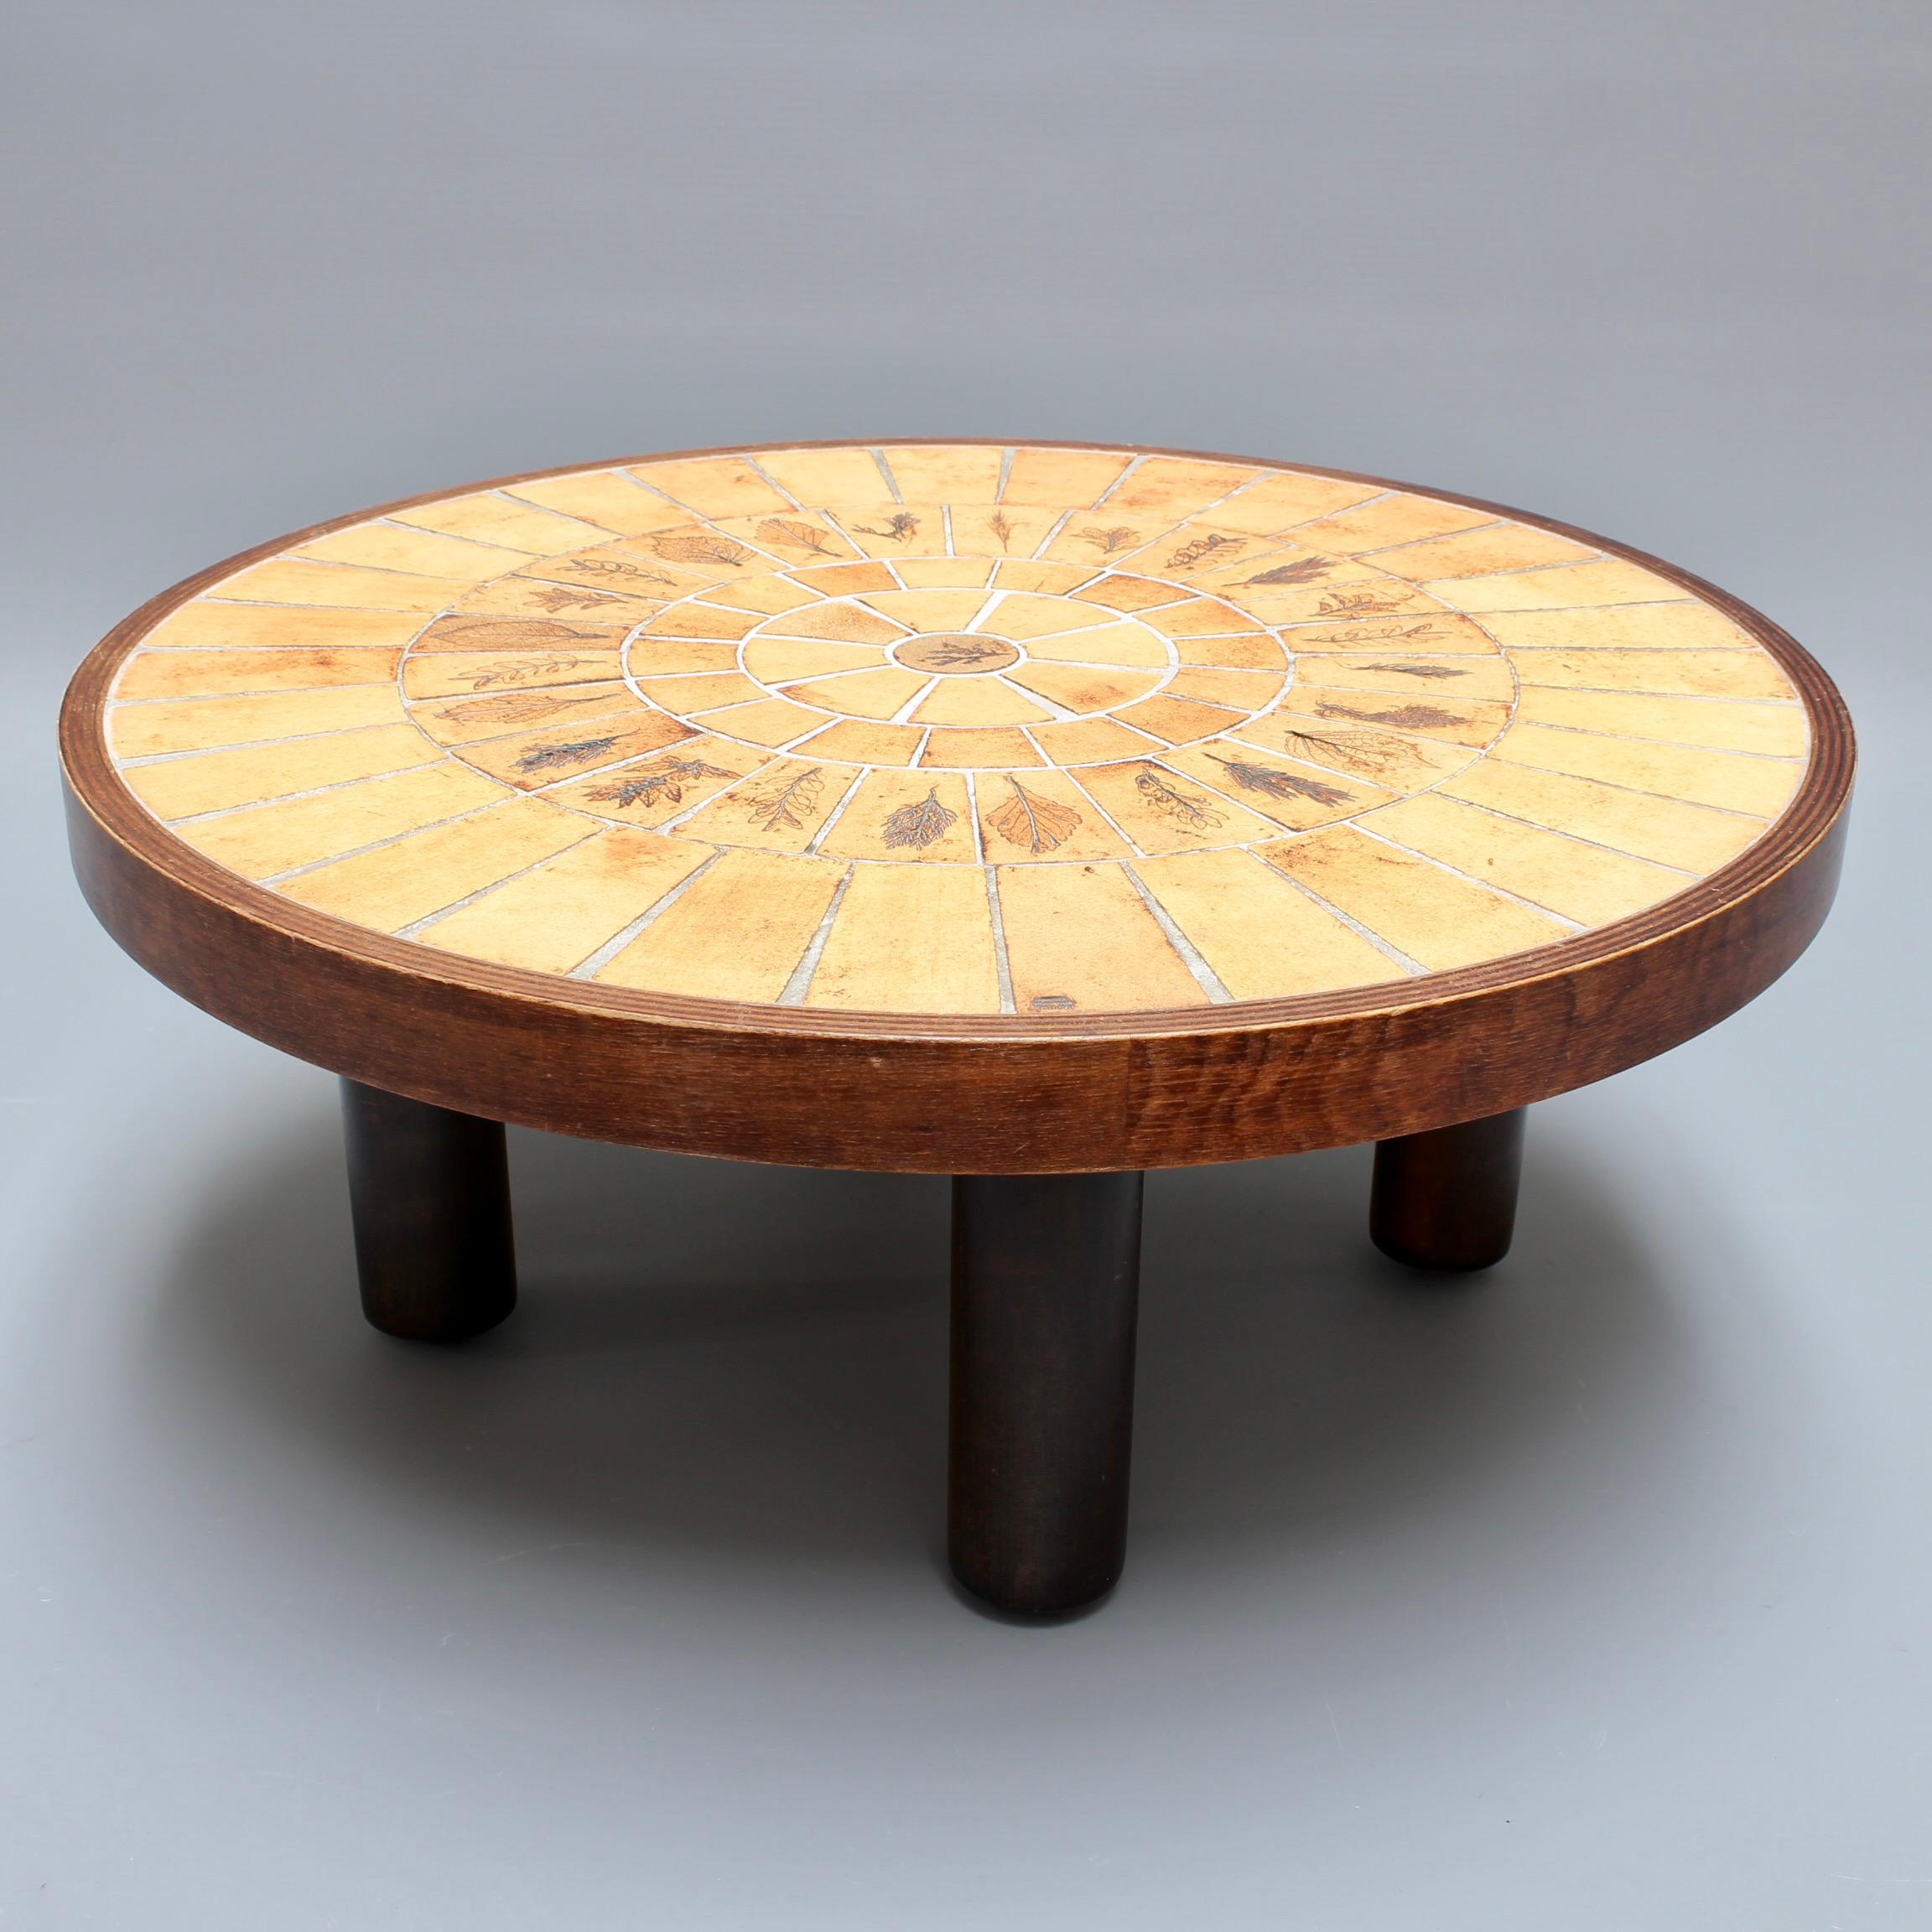 Coffee table with leaf motif earthenware tiles by Roger Capron (circa 1970s). This charming round table is a quintessential example of collectible Capron. There are nature-themed tiles with a variety of beautiful leaves impressed into the